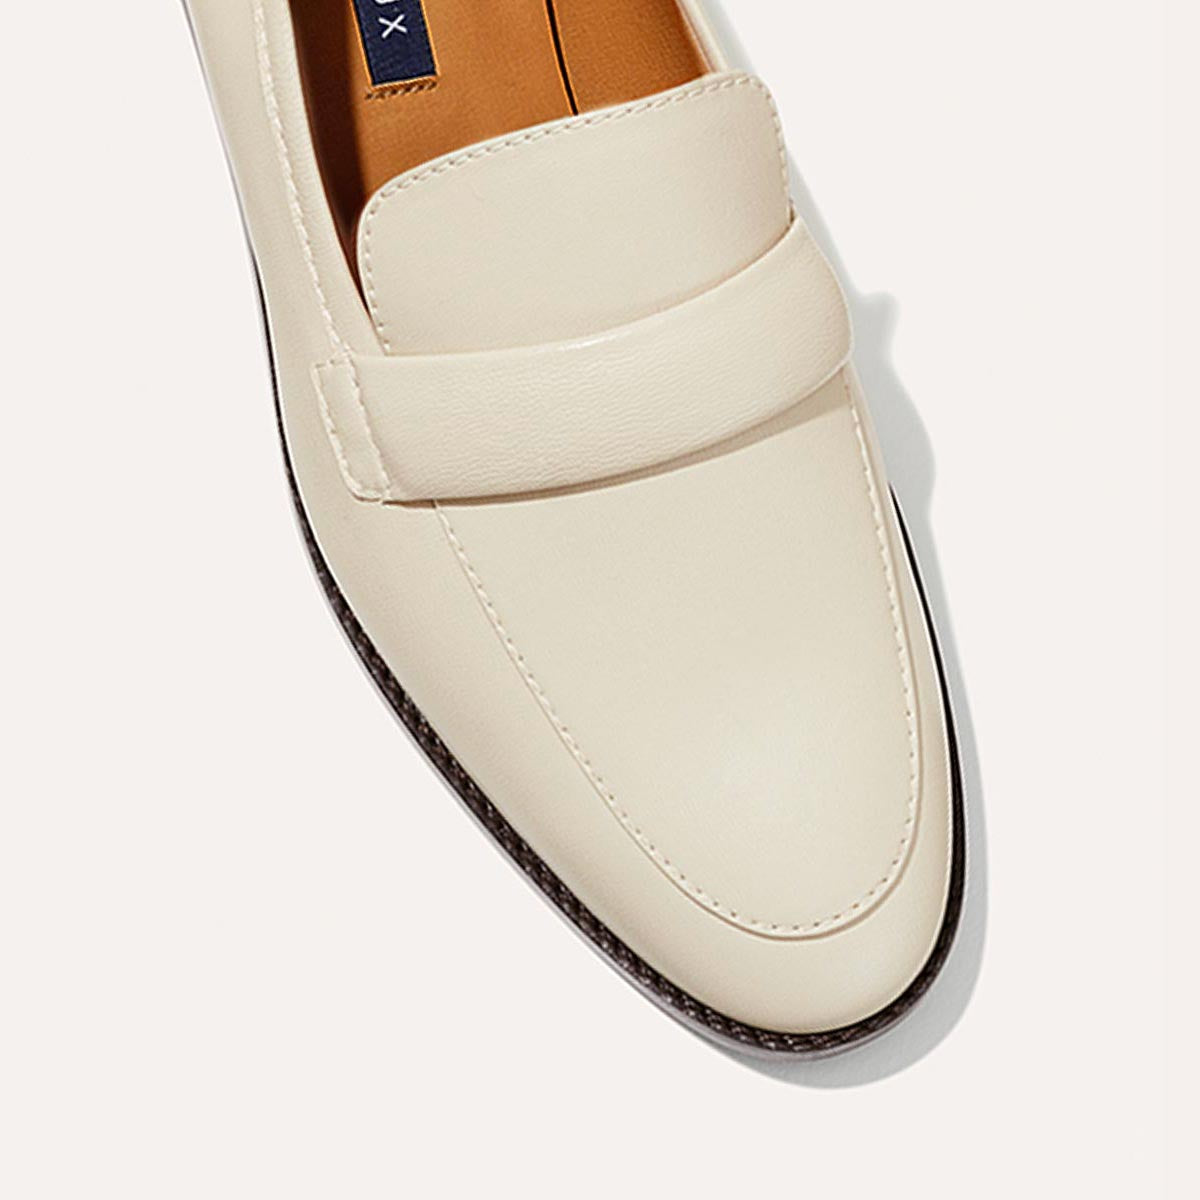 The Andie Loafer - Ecru Nappa